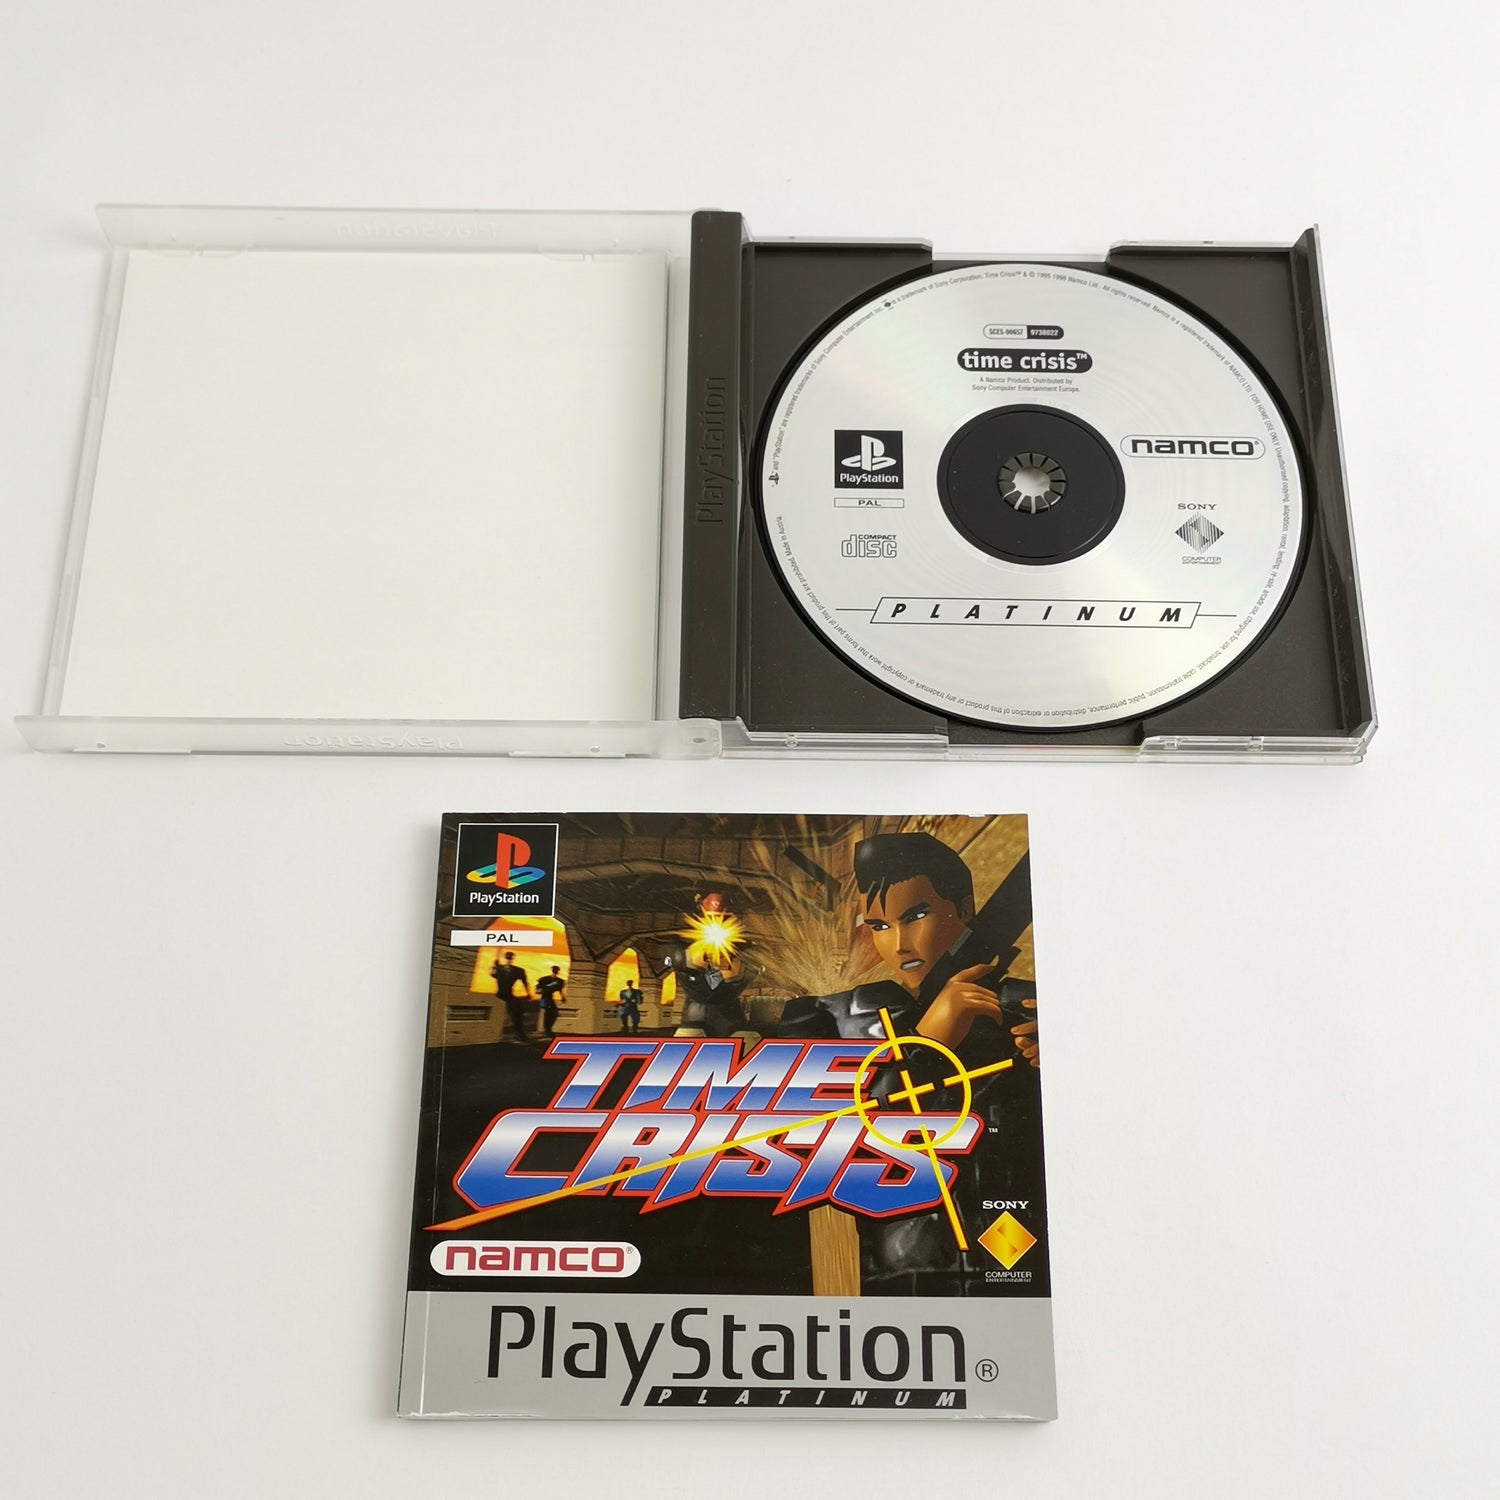 Sony Playstation 1 game: Time Crisis by Namco - original packaging & instructions | PS1 PSX PAL